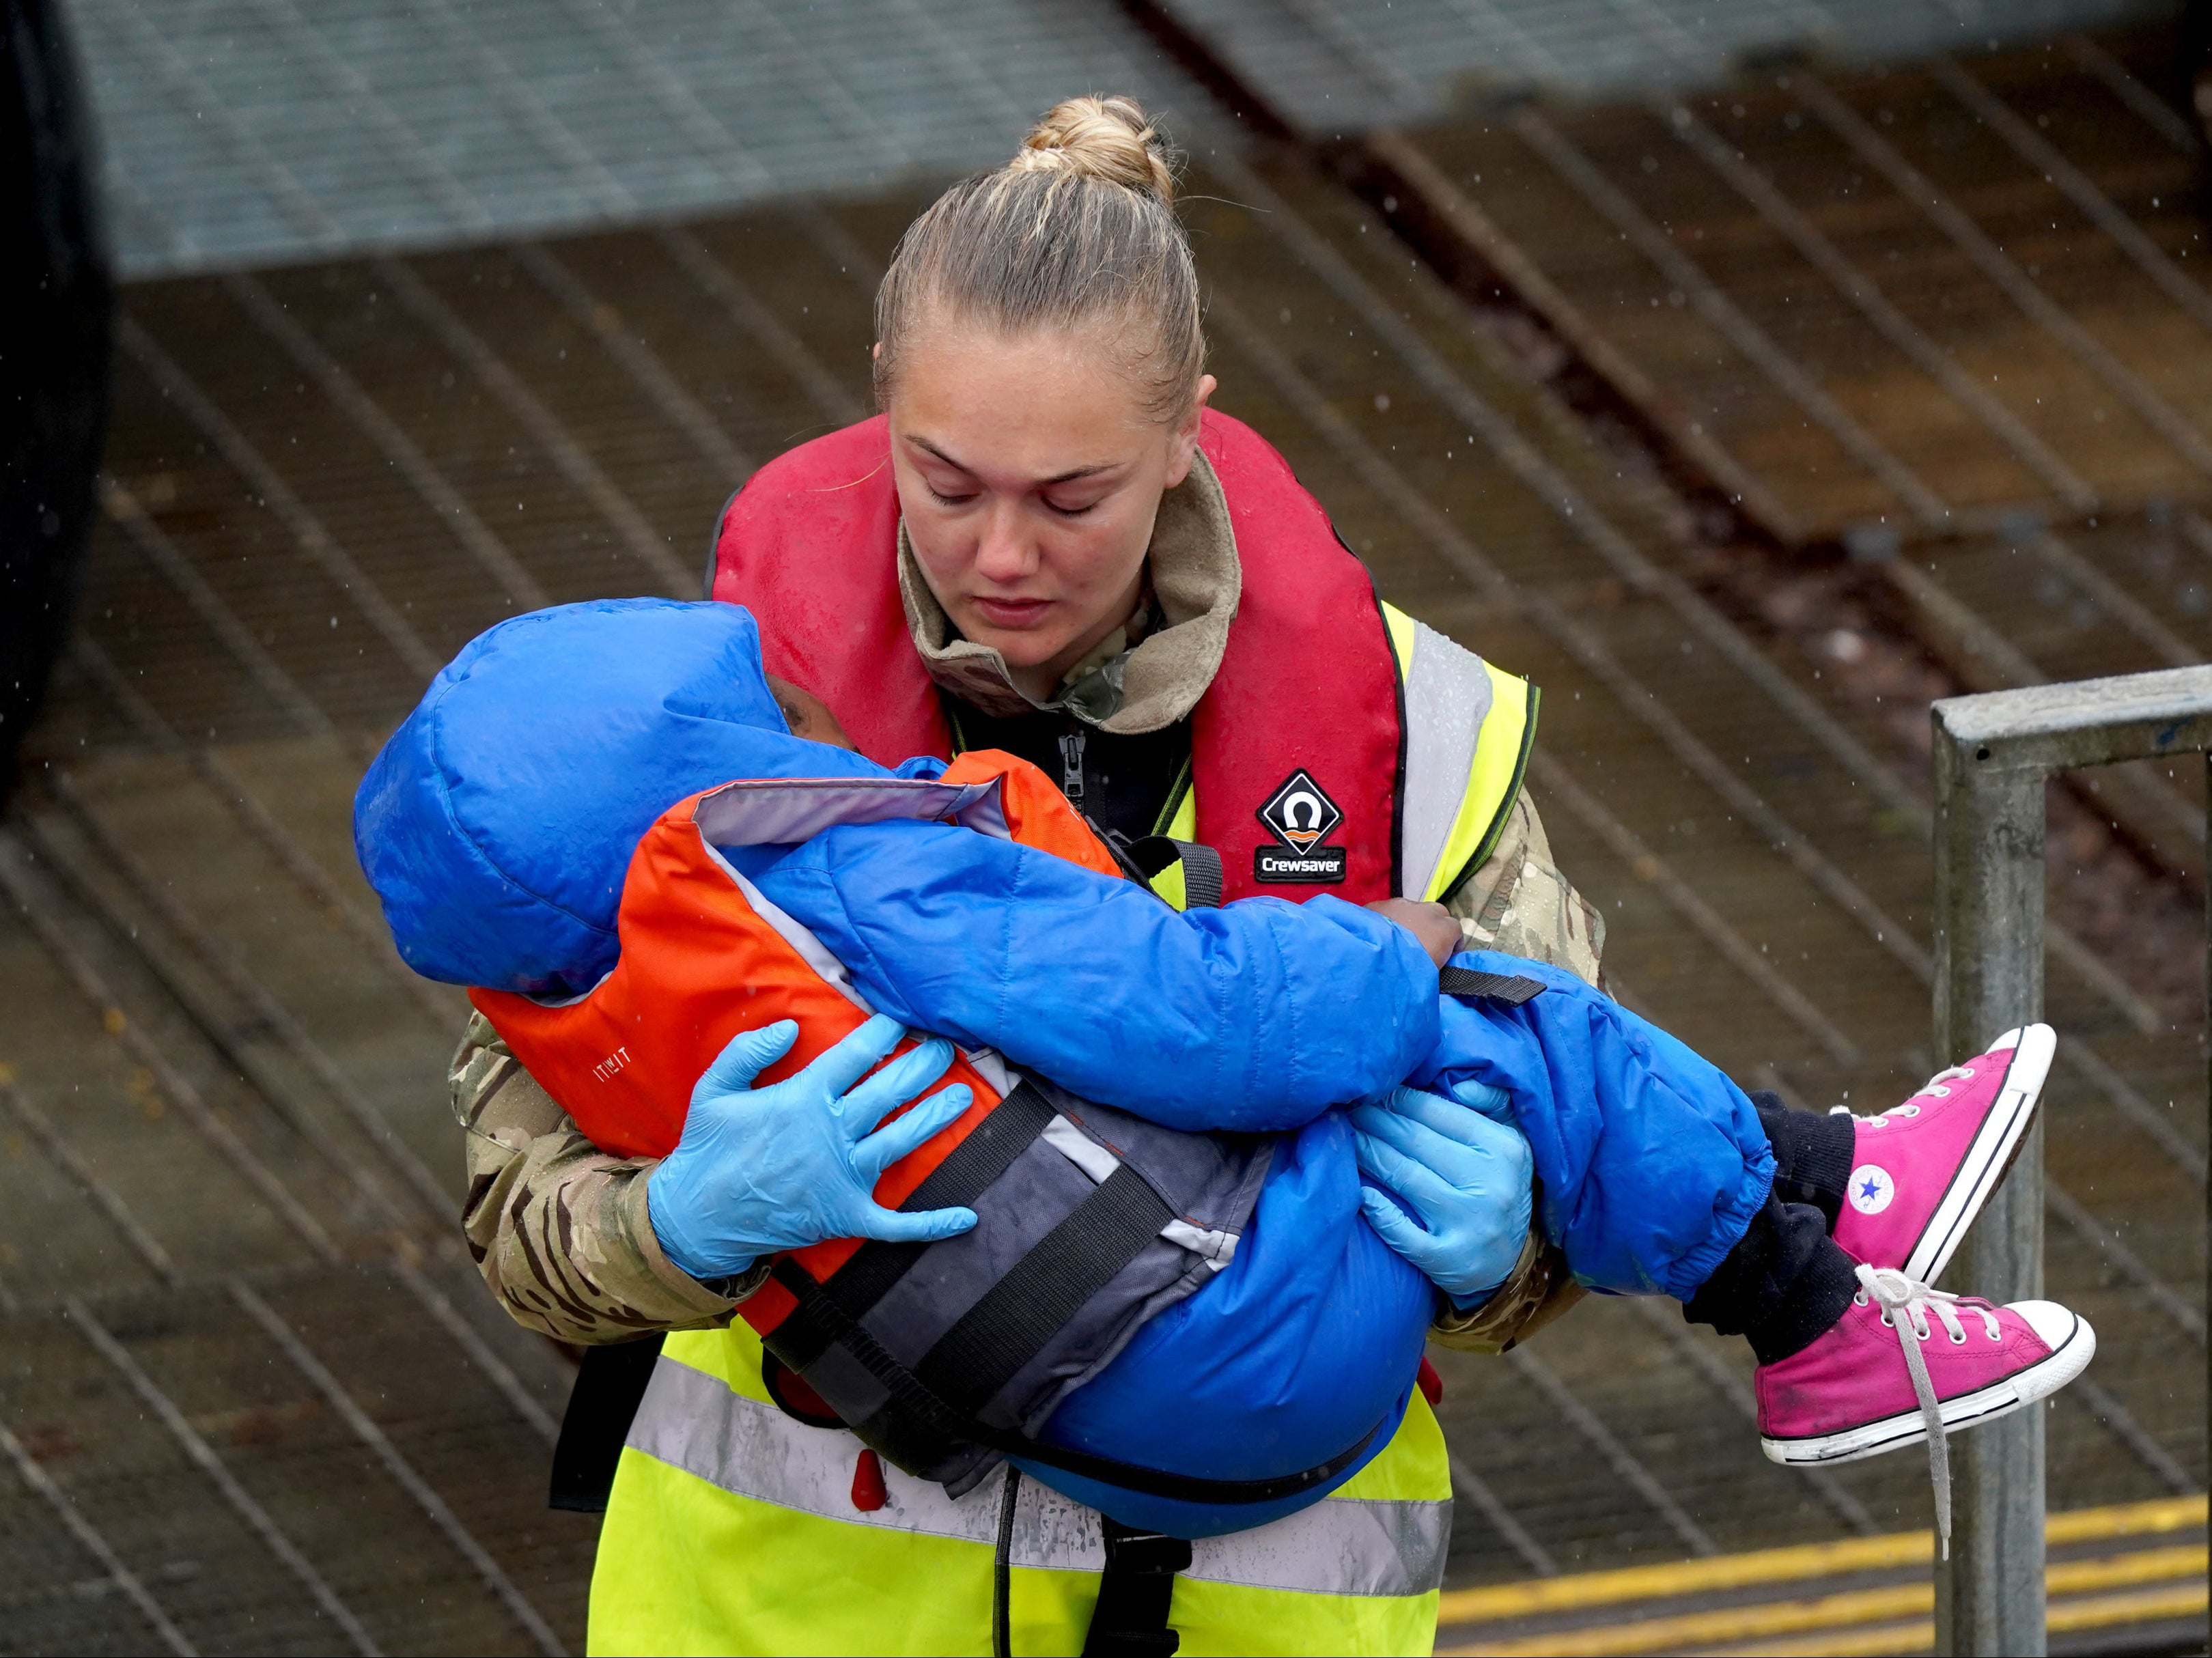 A young child amongst group of people thought to be migrants is carried by a member of the military as they are brought in to Dover, Kent, on 23 May 2022